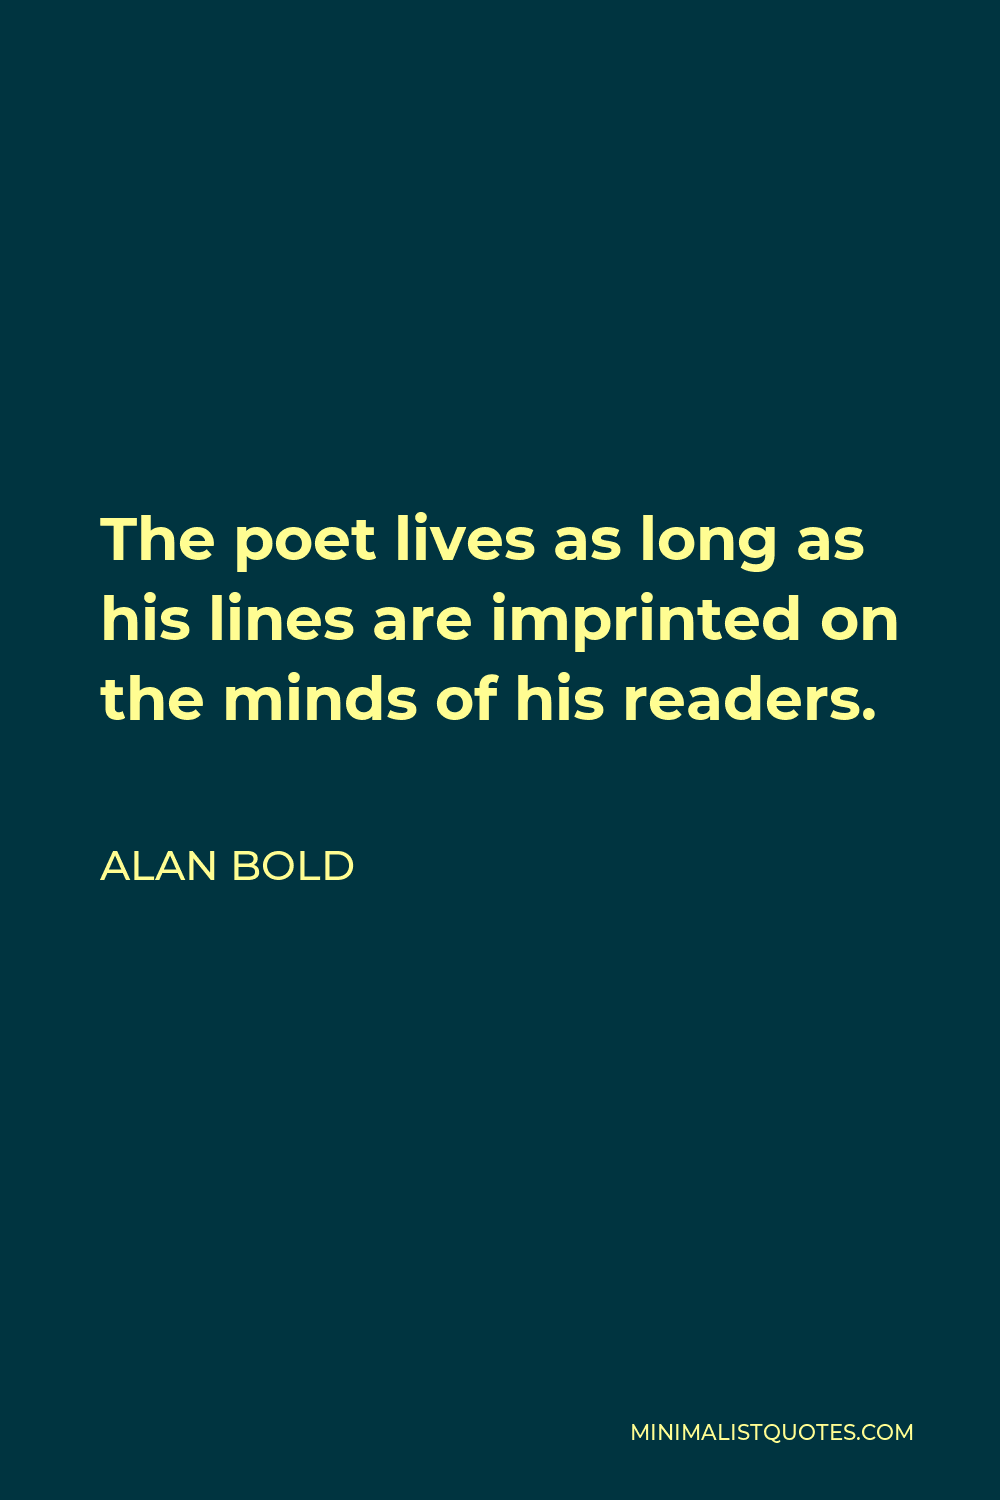 Alan Bold Quote - The poet lives as long as his lines are imprinted on the minds of his readers.